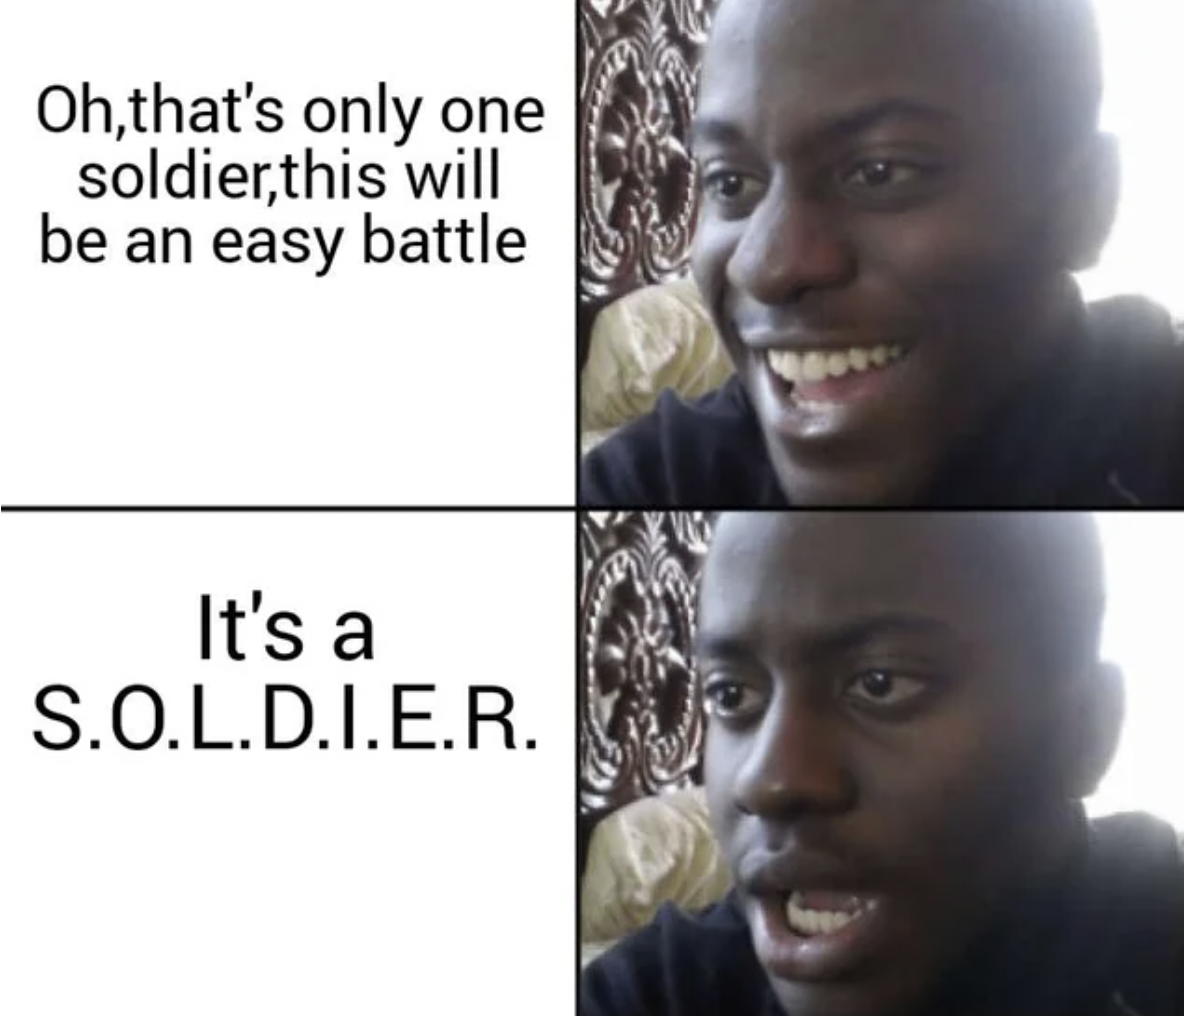 worst day of my life memes - Oh,that's only one soldier,this will be an easy battle It's a S.O.L.D.I.E.R.